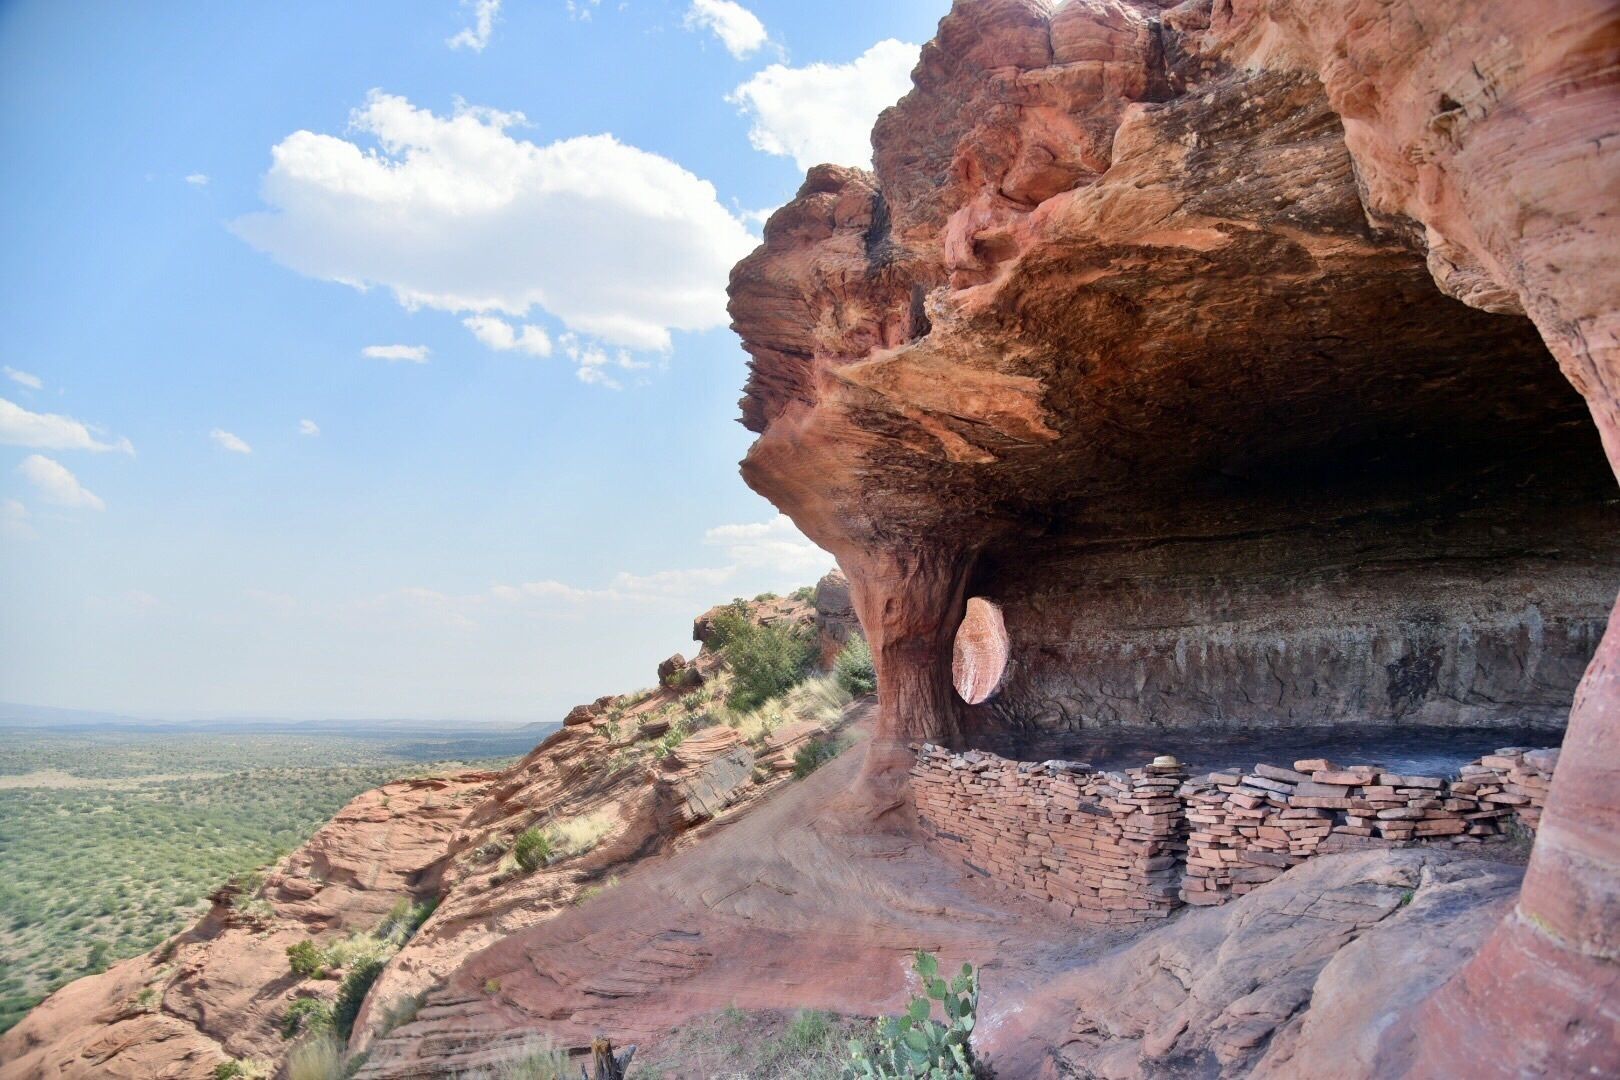 The Most Scenic Hiking Trail In Arizona Is Robbers Roost